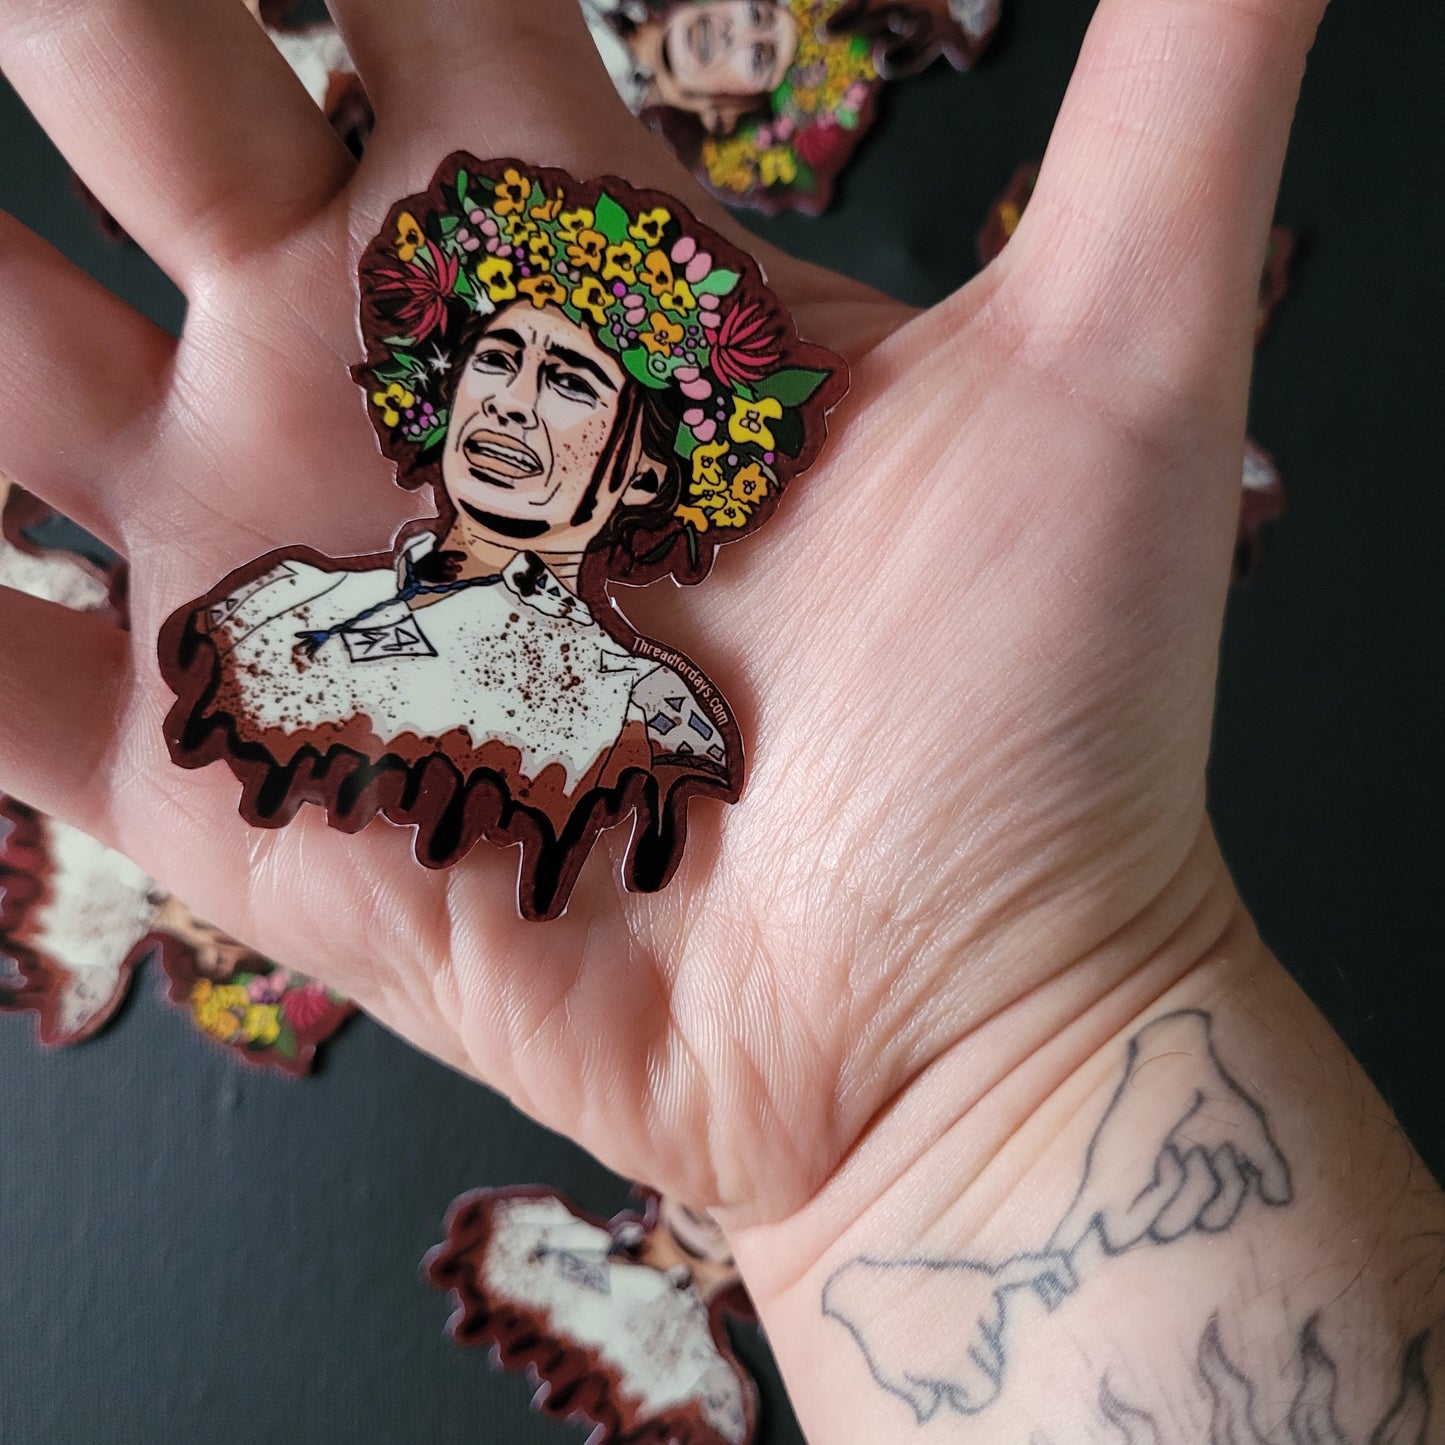 midsommar sticker in palm of hand to demonstrate size